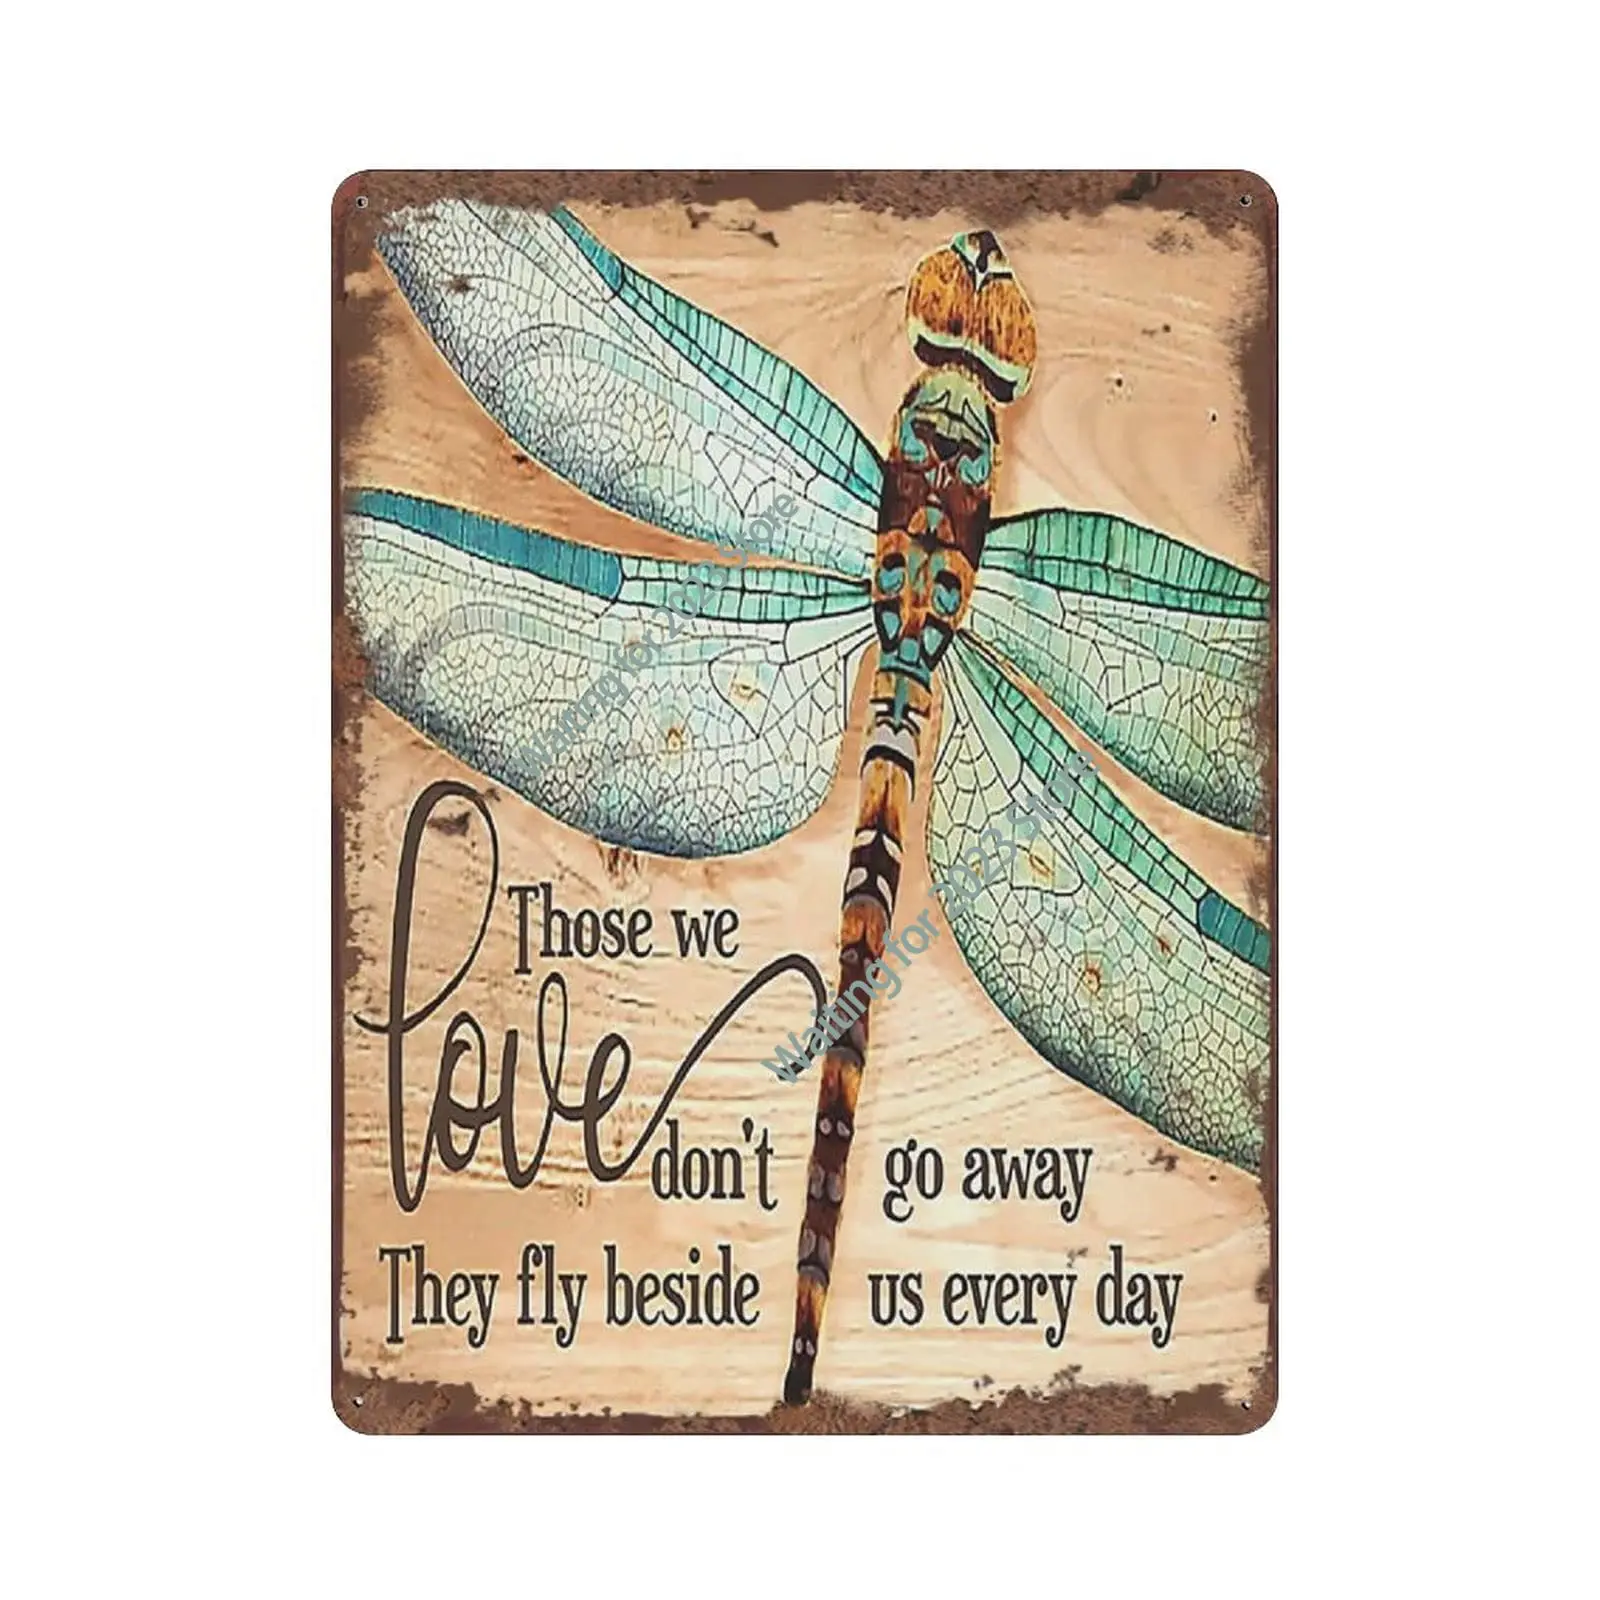 

Those We Love Don't Go Away Hippie Retro Tin Sign Motivational Quote Metal Tin Sign Dragonfly Lovers Gift Loved Wall Art Home